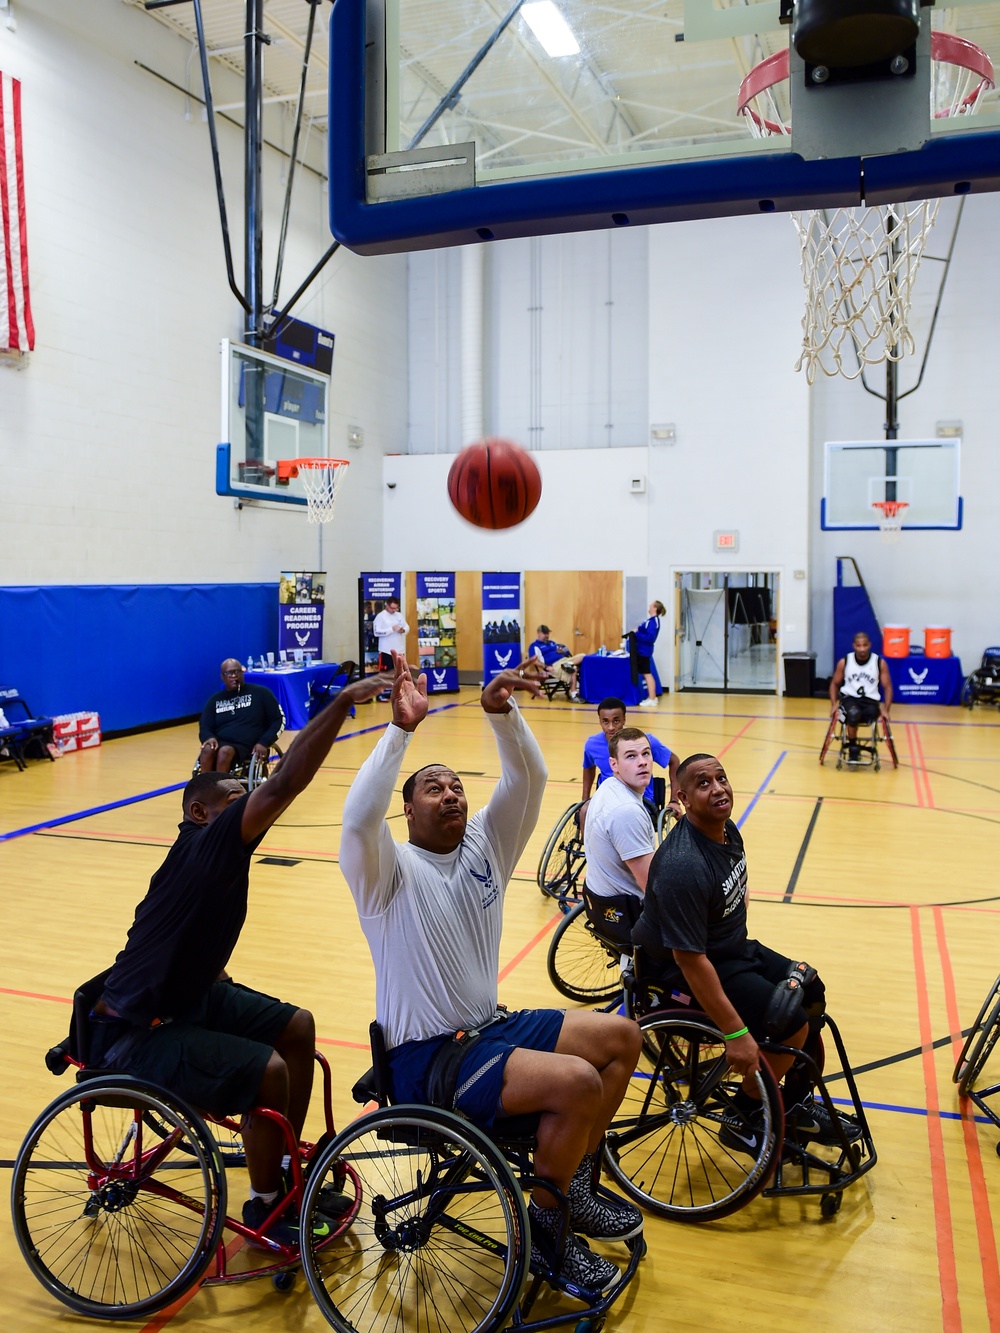 Rehabilitating wounded warriors through sports